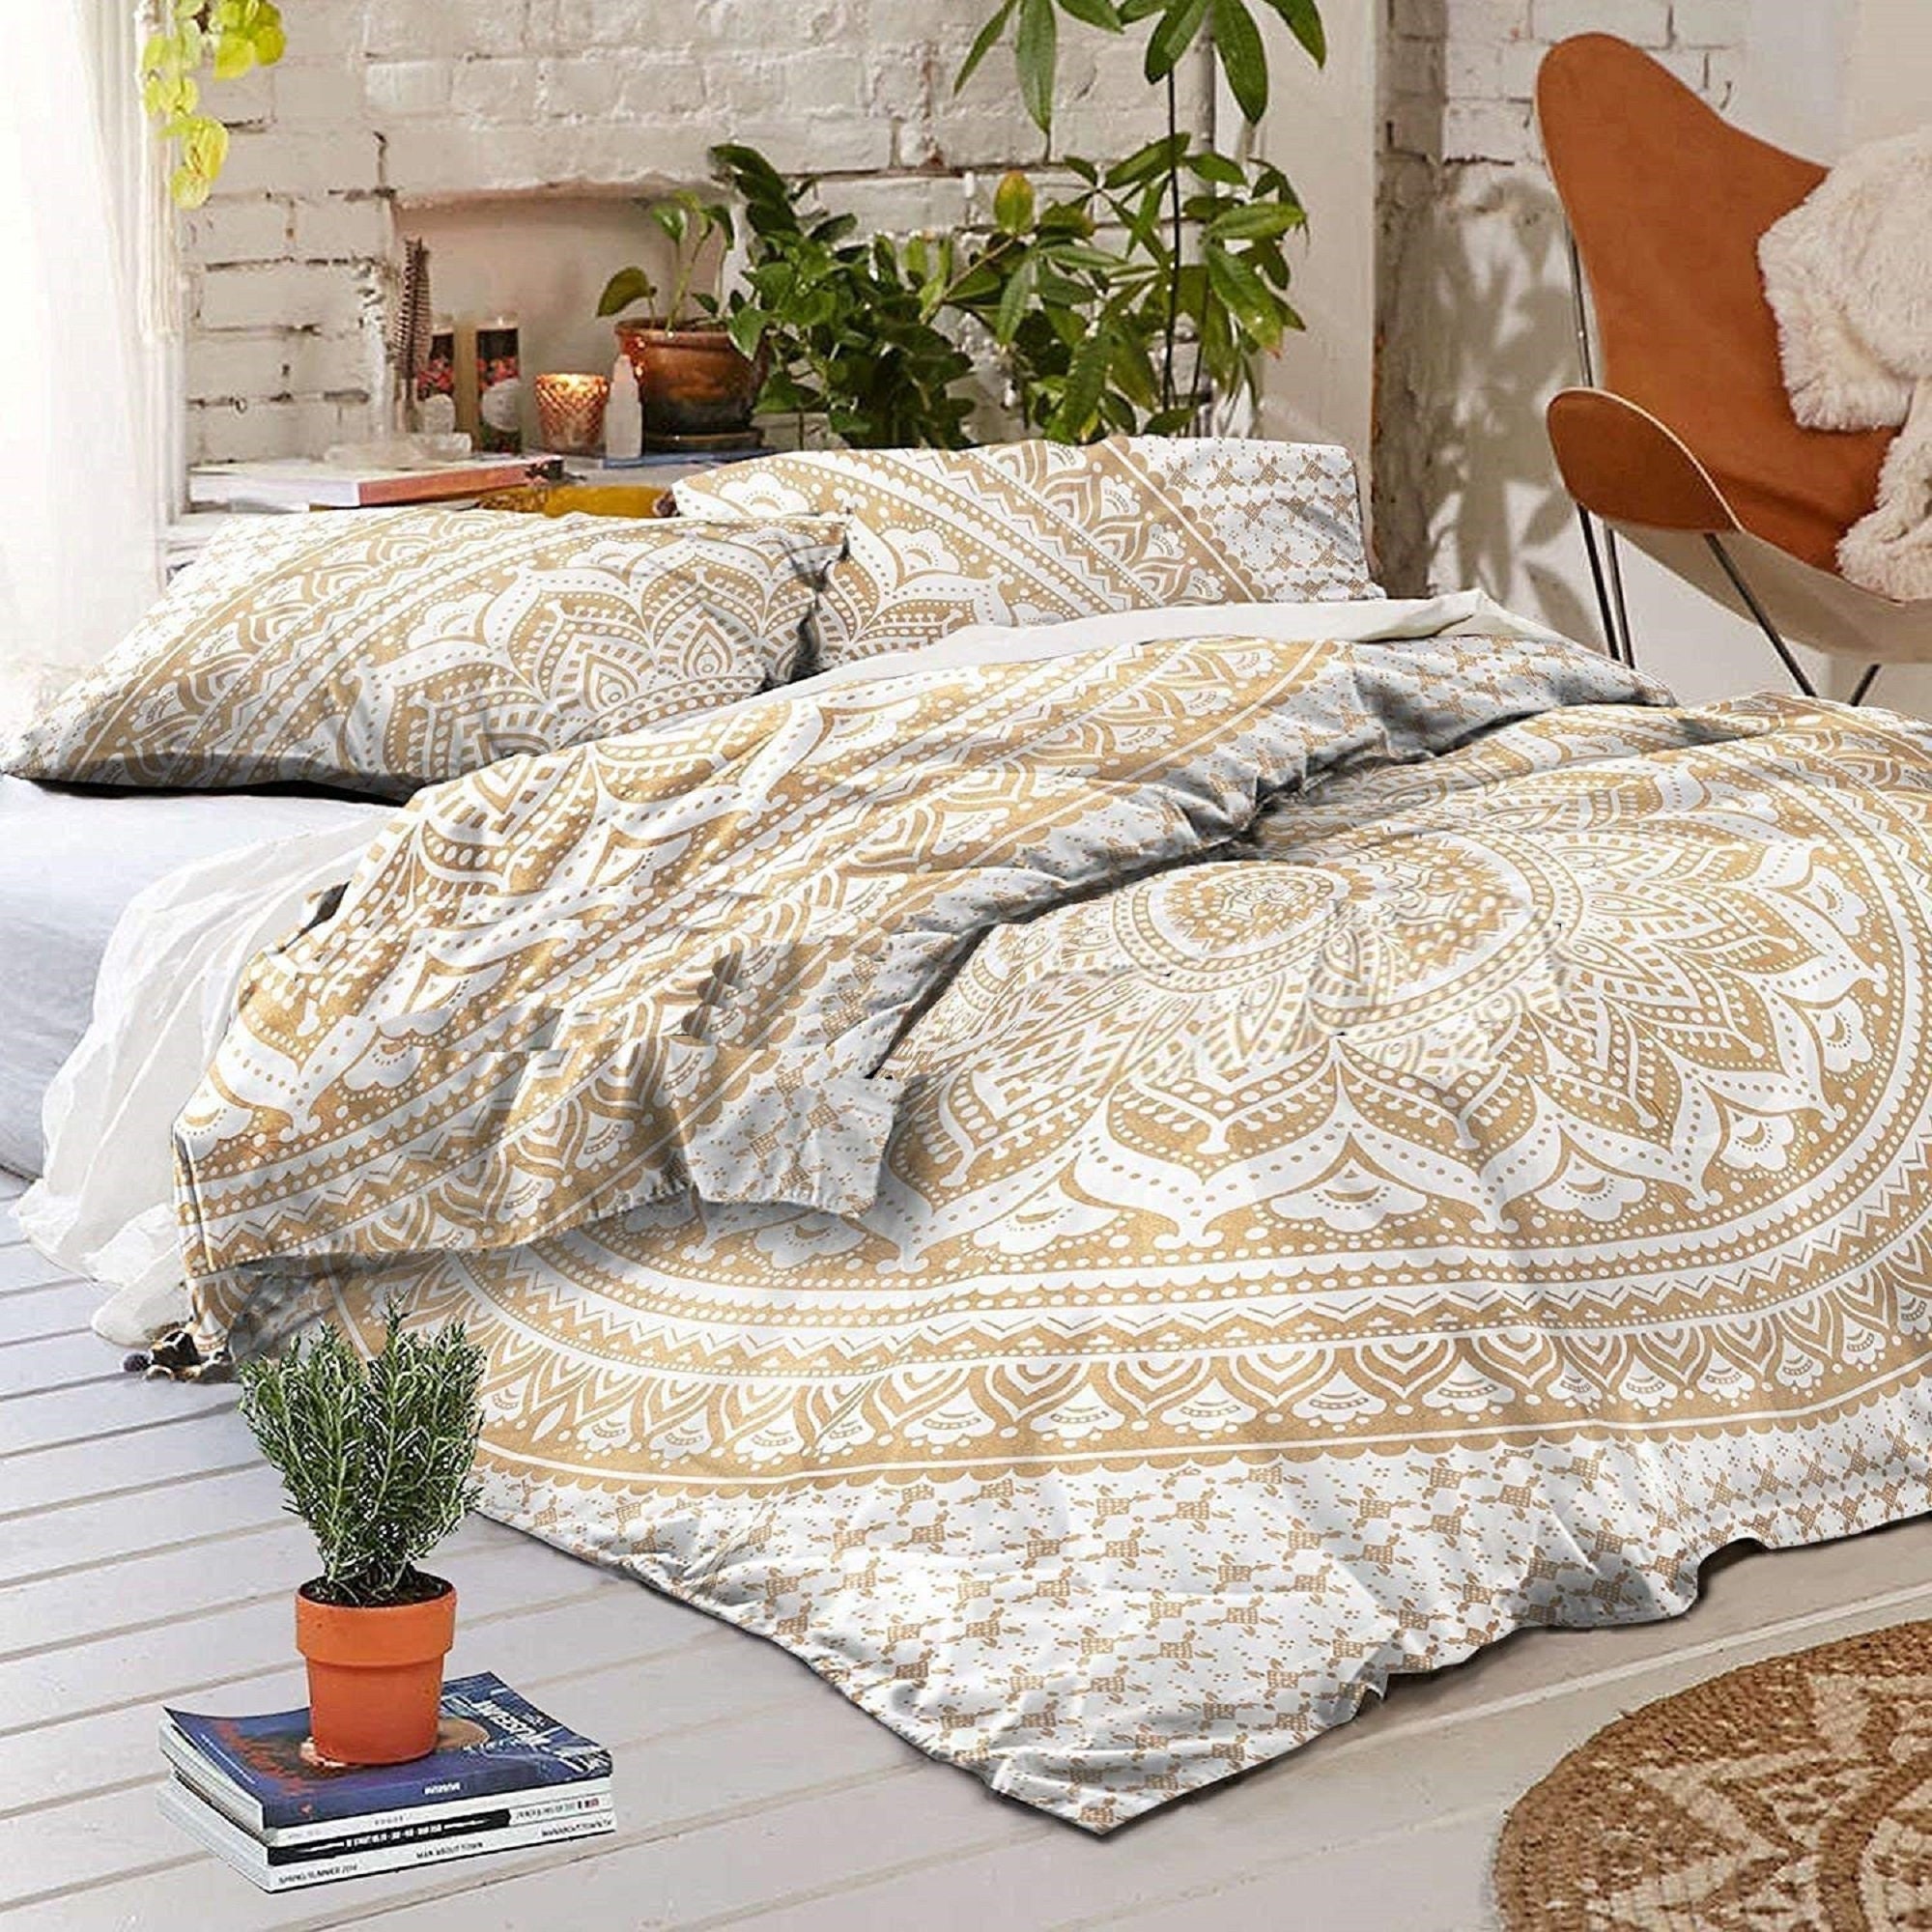 Bohemian Indian Mandala 100% Cotton Double Bedding Bed Sheets With Pillow Covers 